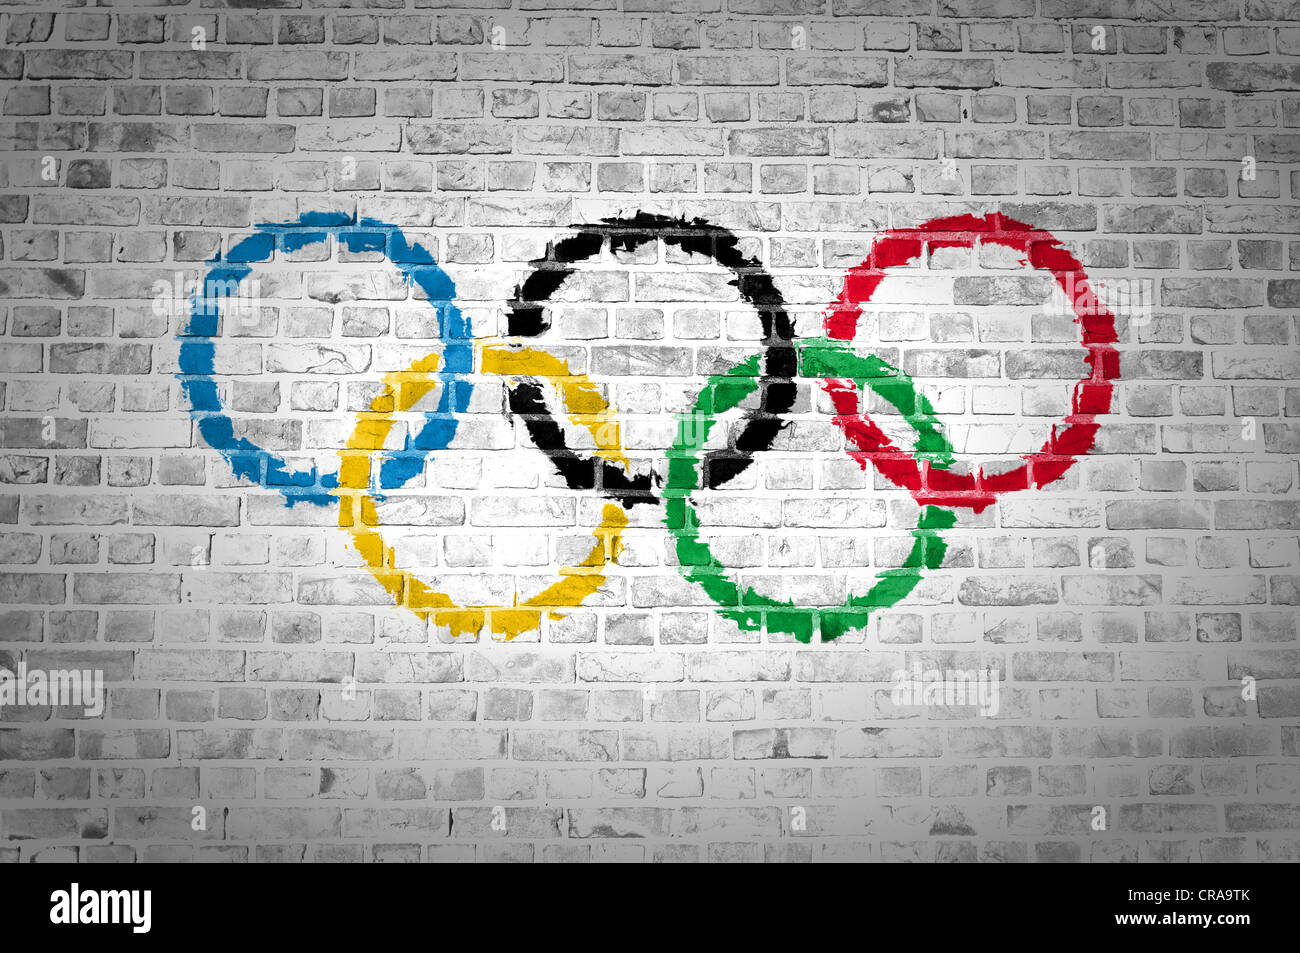 An image of the Olympic Movement flag painted on a brick wall in an urban location Stock Photo